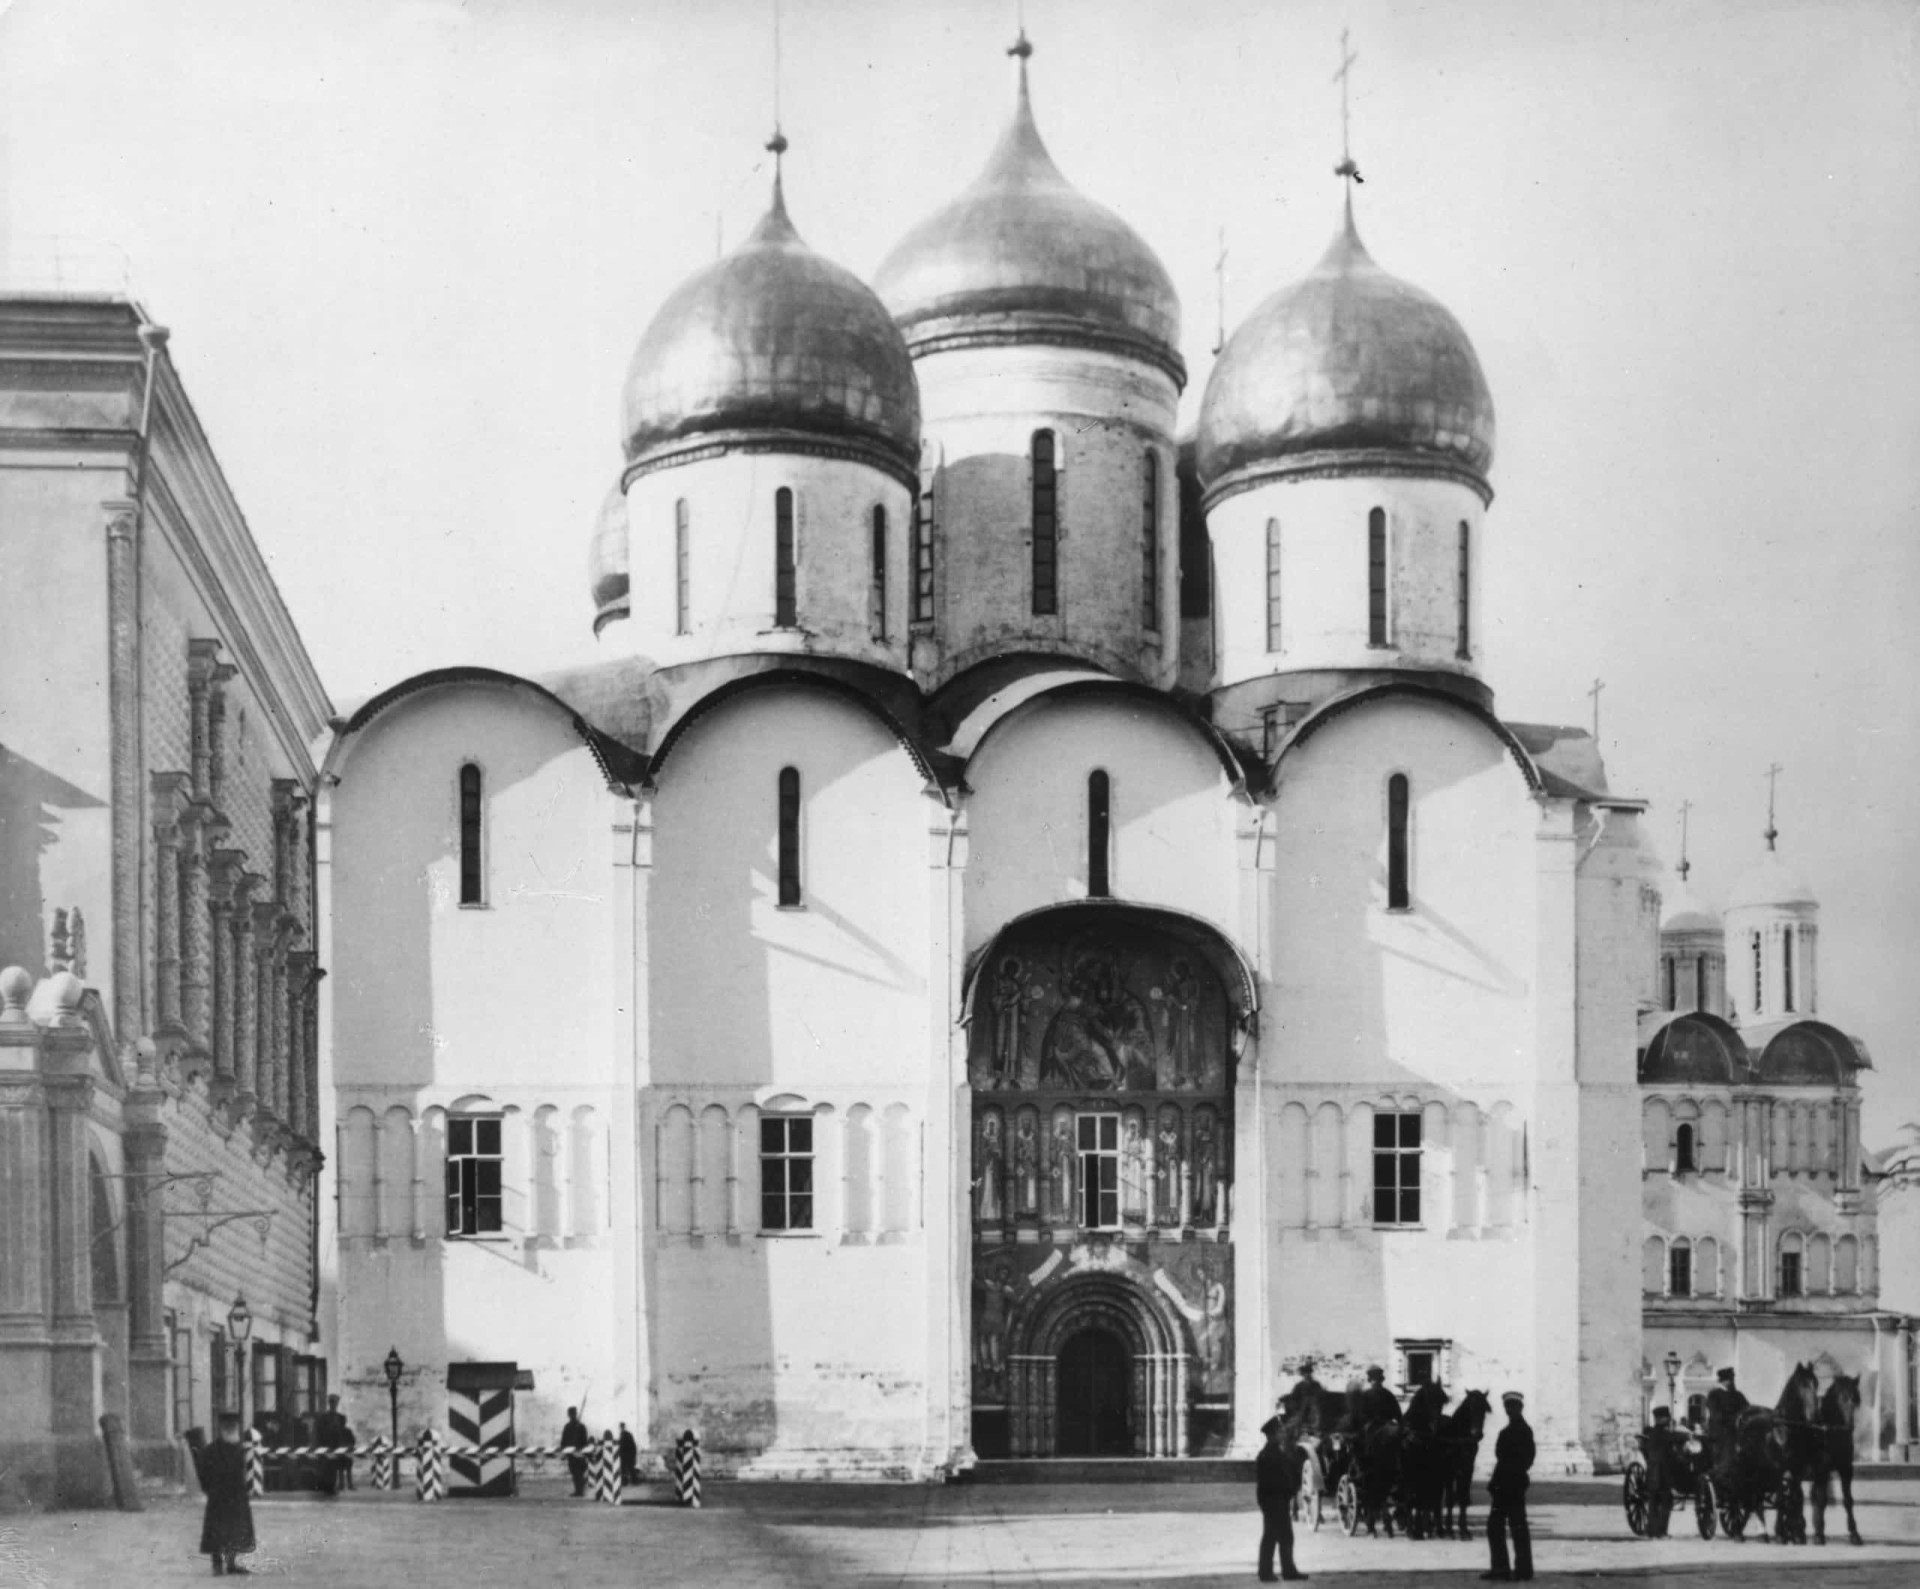 A snap of Moscow's <a href="https://uk.starsinsider.com/travel/274097/the-worlds-quirkiest-churches">Cathedral</a> of the Assumption, also known as Dormition Cathedral, taken back in 1869.